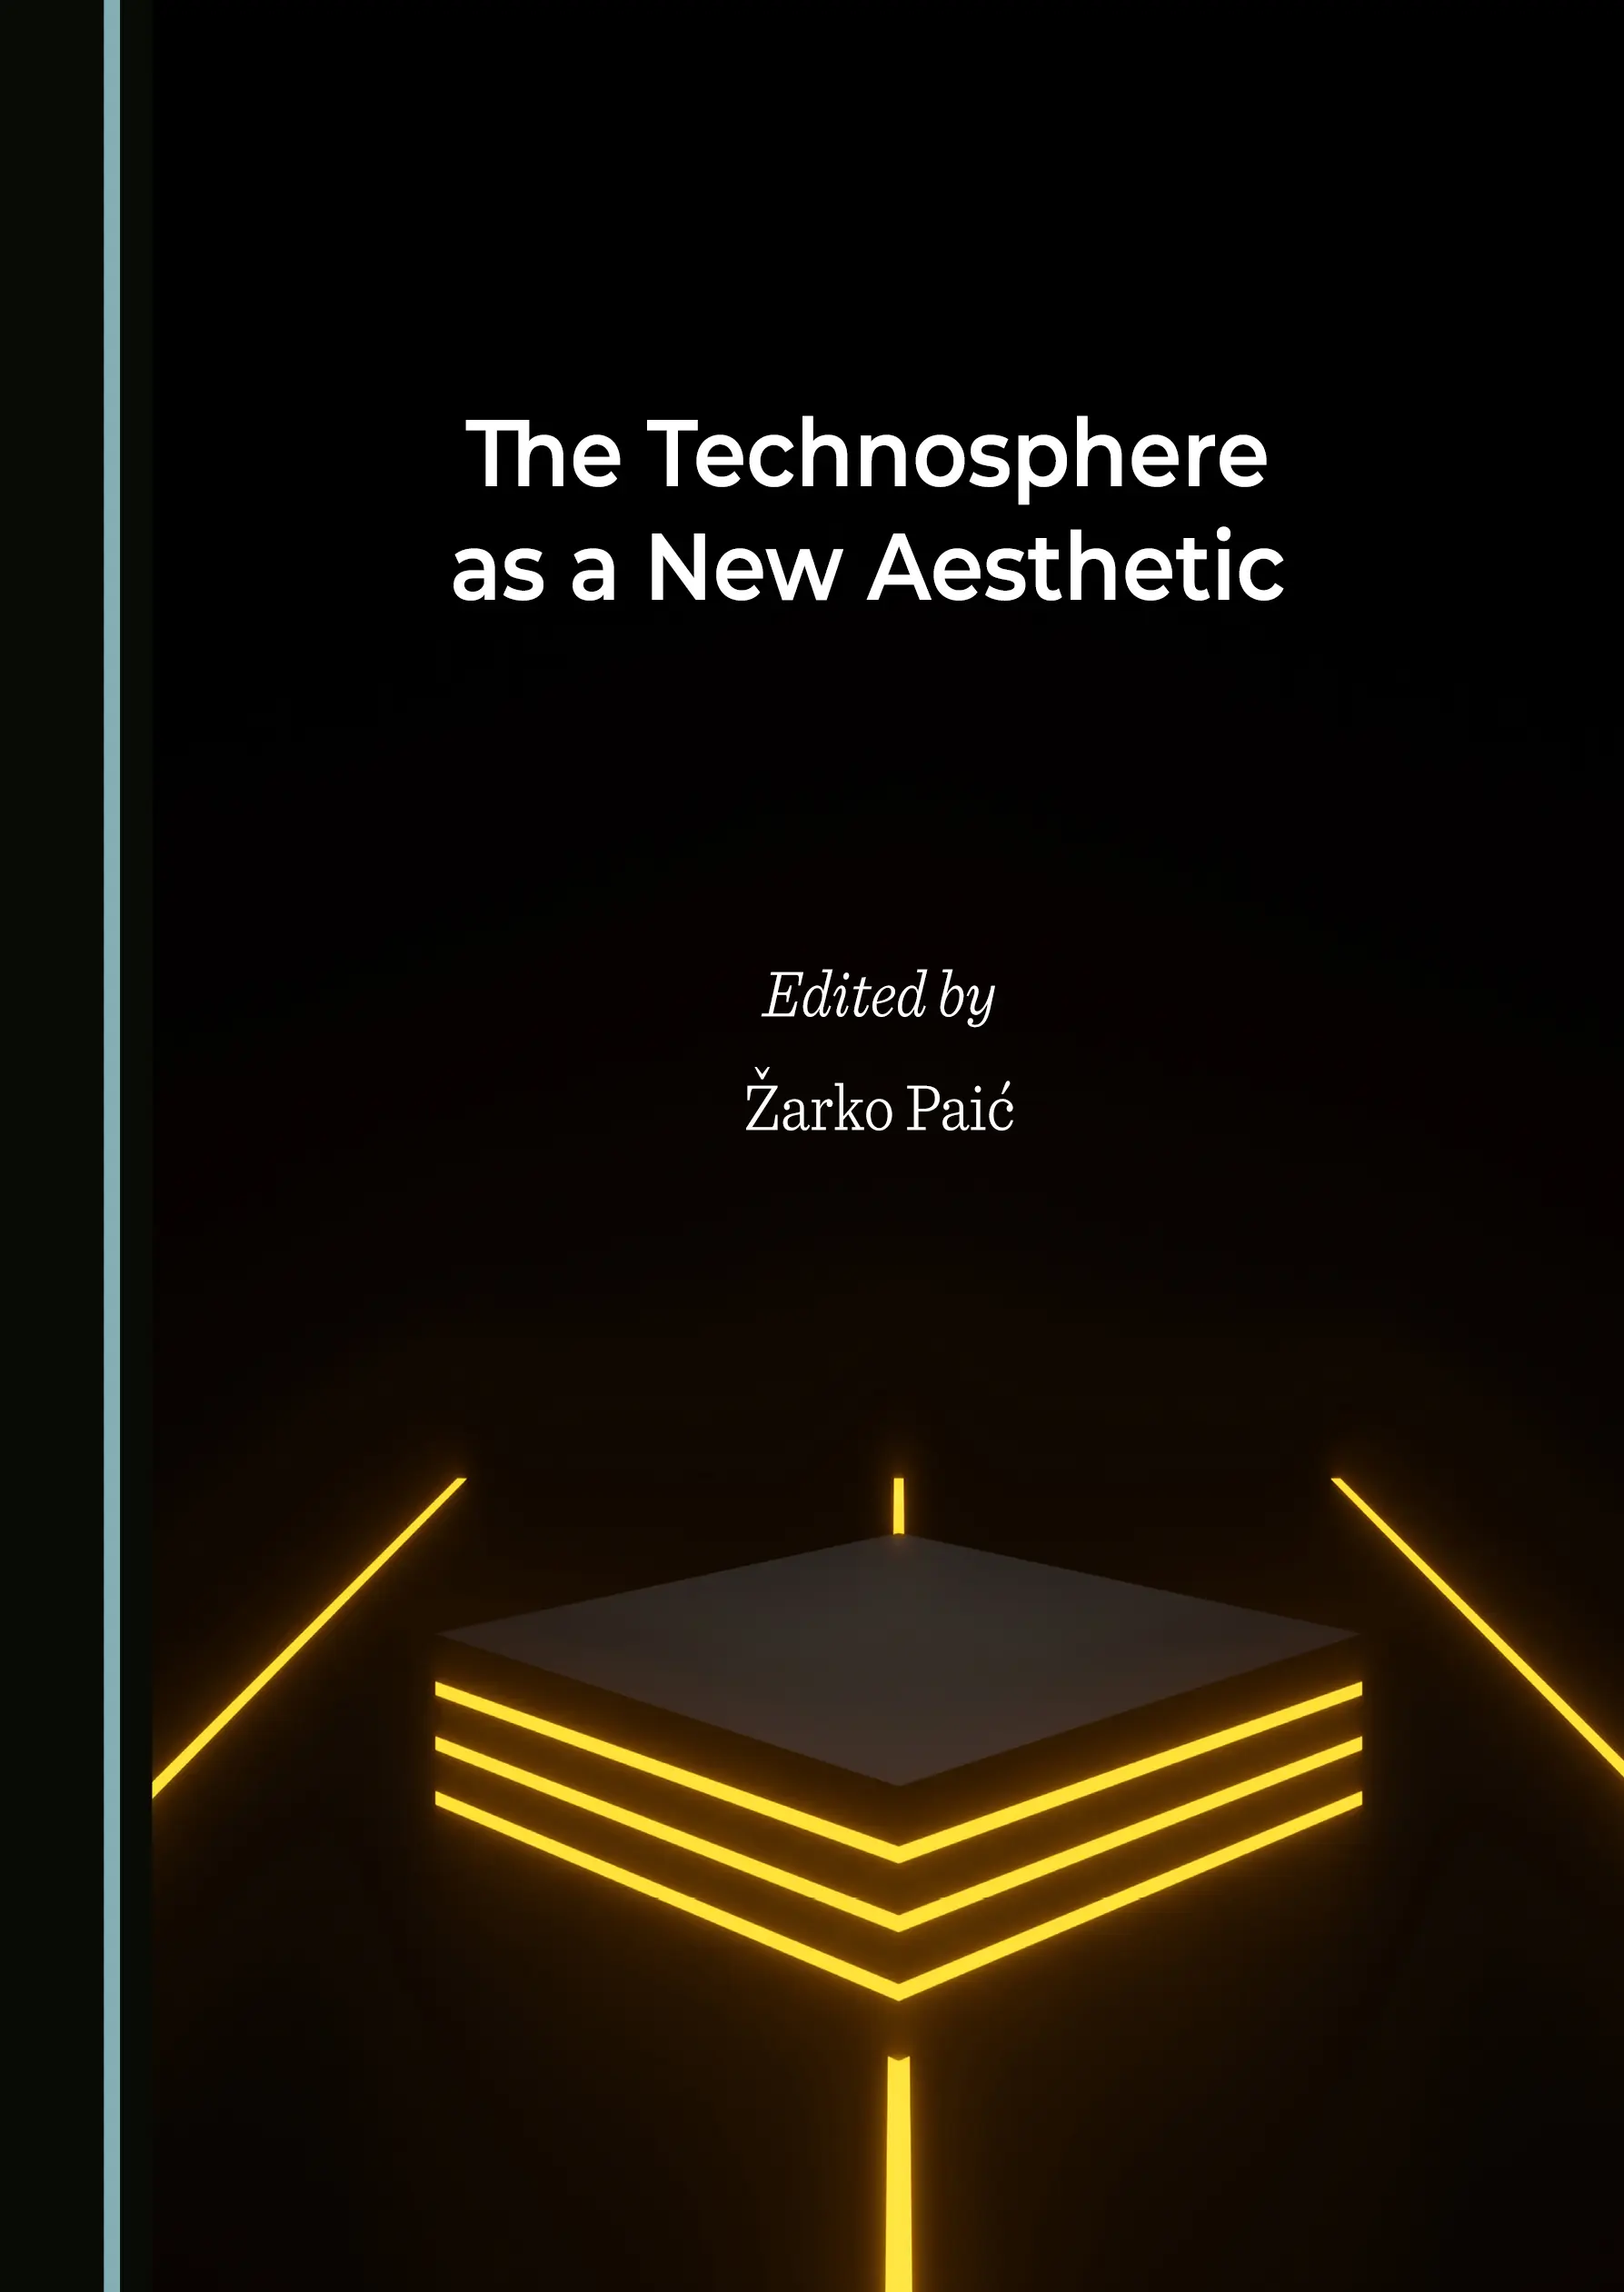 The Technosphere as a New Aesthetic